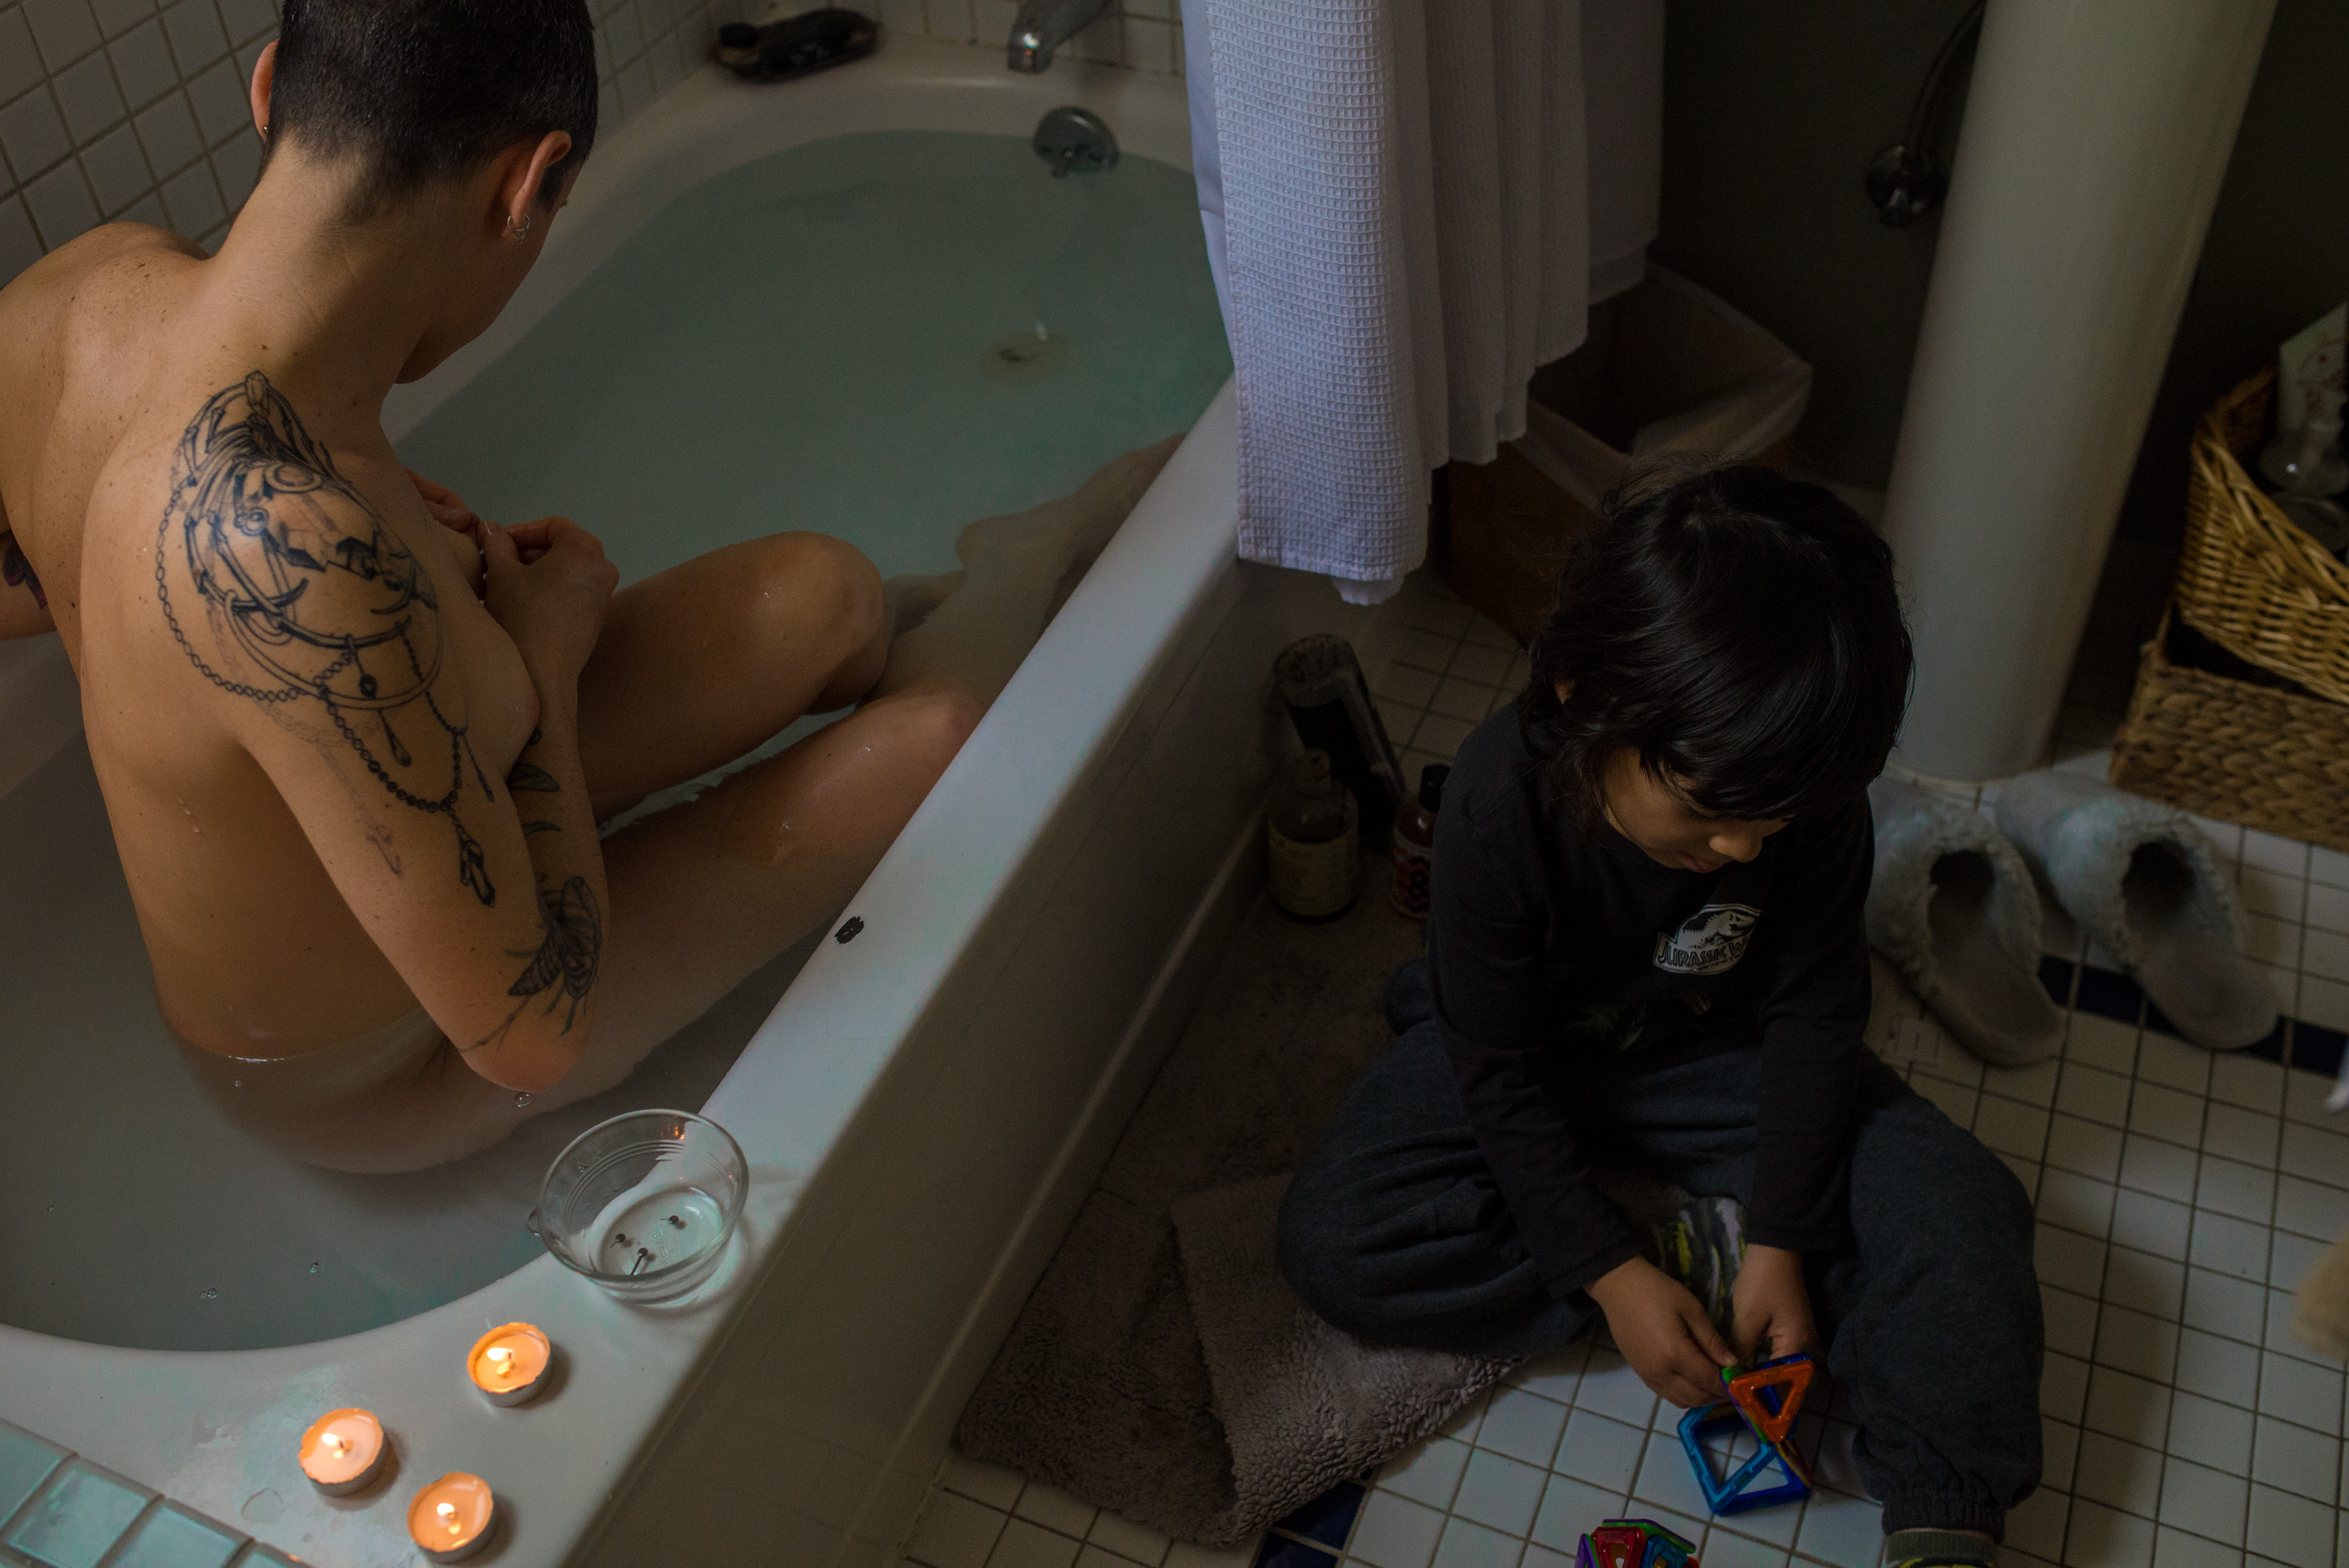 A woman takes a bath as a child plays with toys outside of the bath tub.